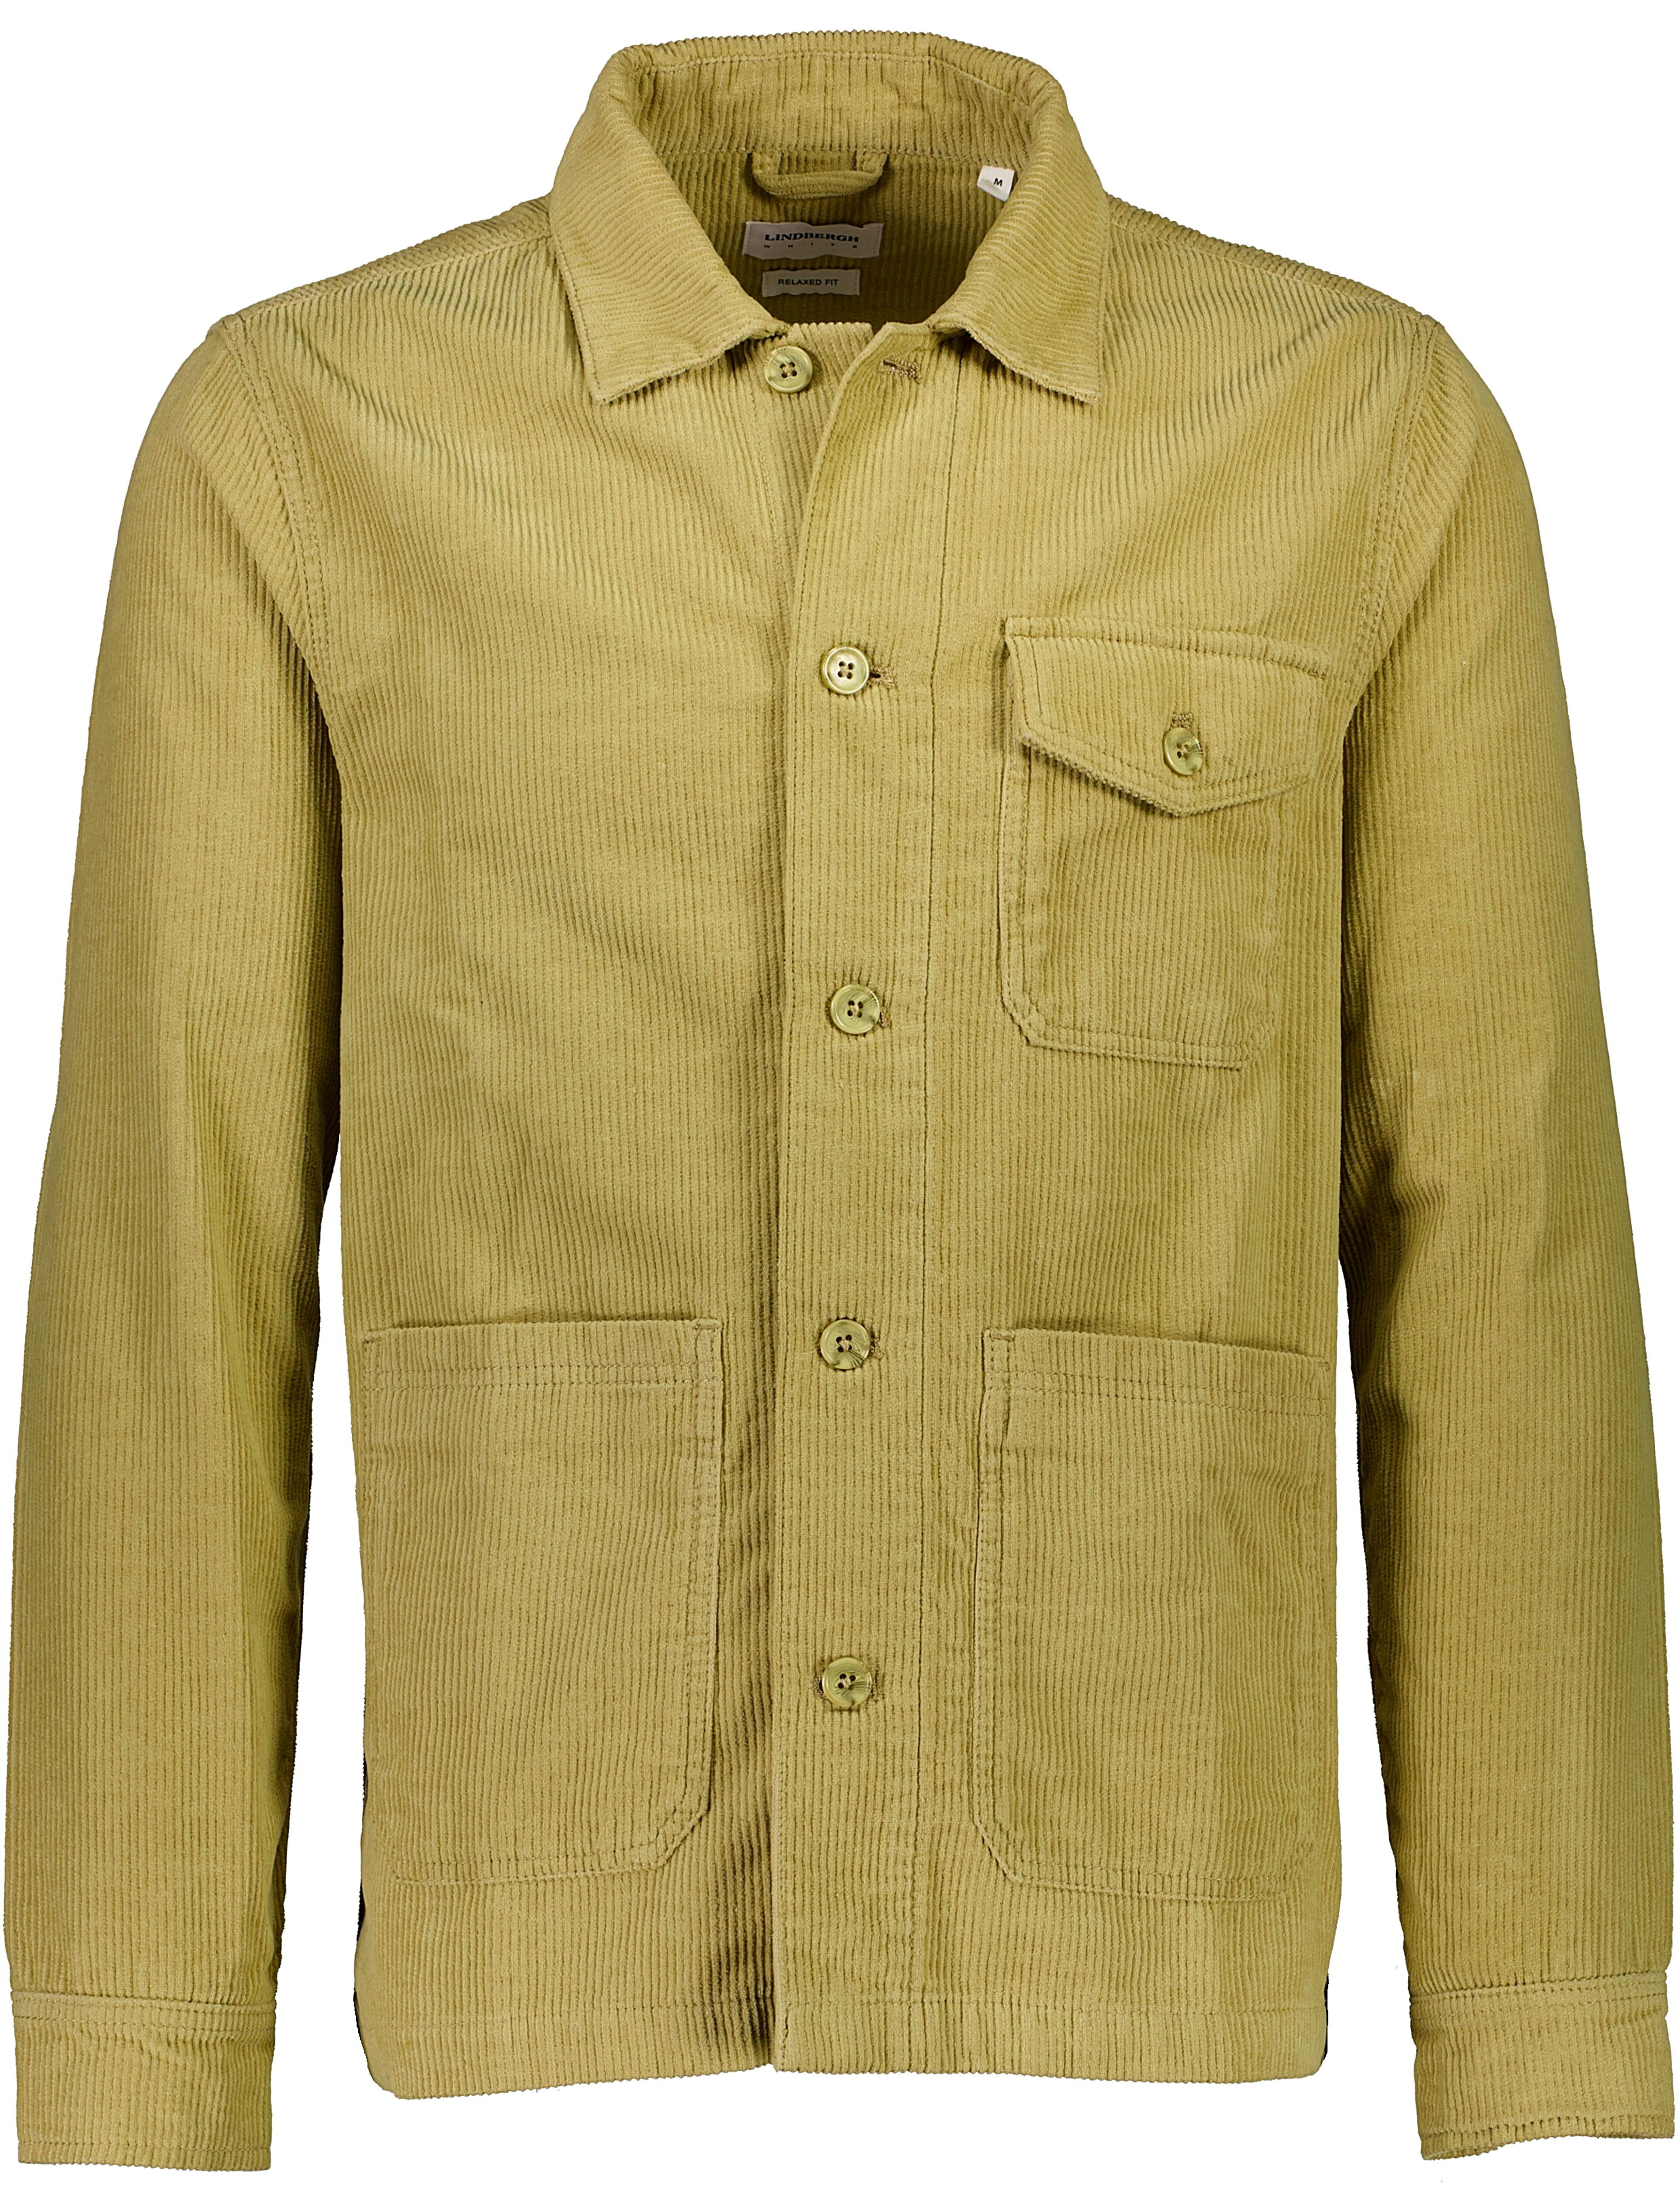 Overshirt | Relaxed fit 30-305490